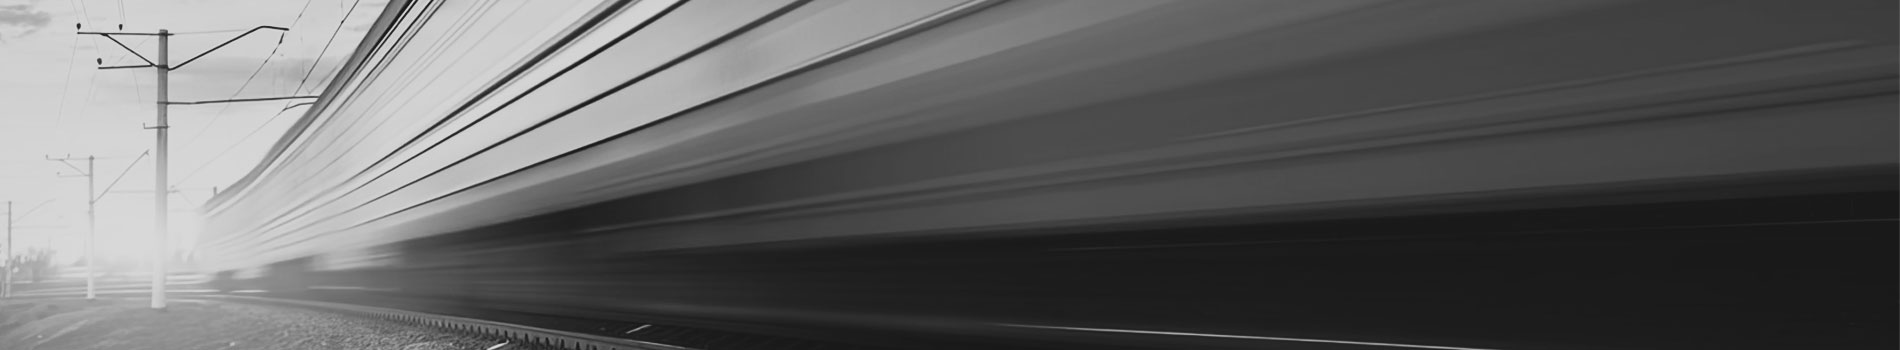 Black and white image of a high speed train